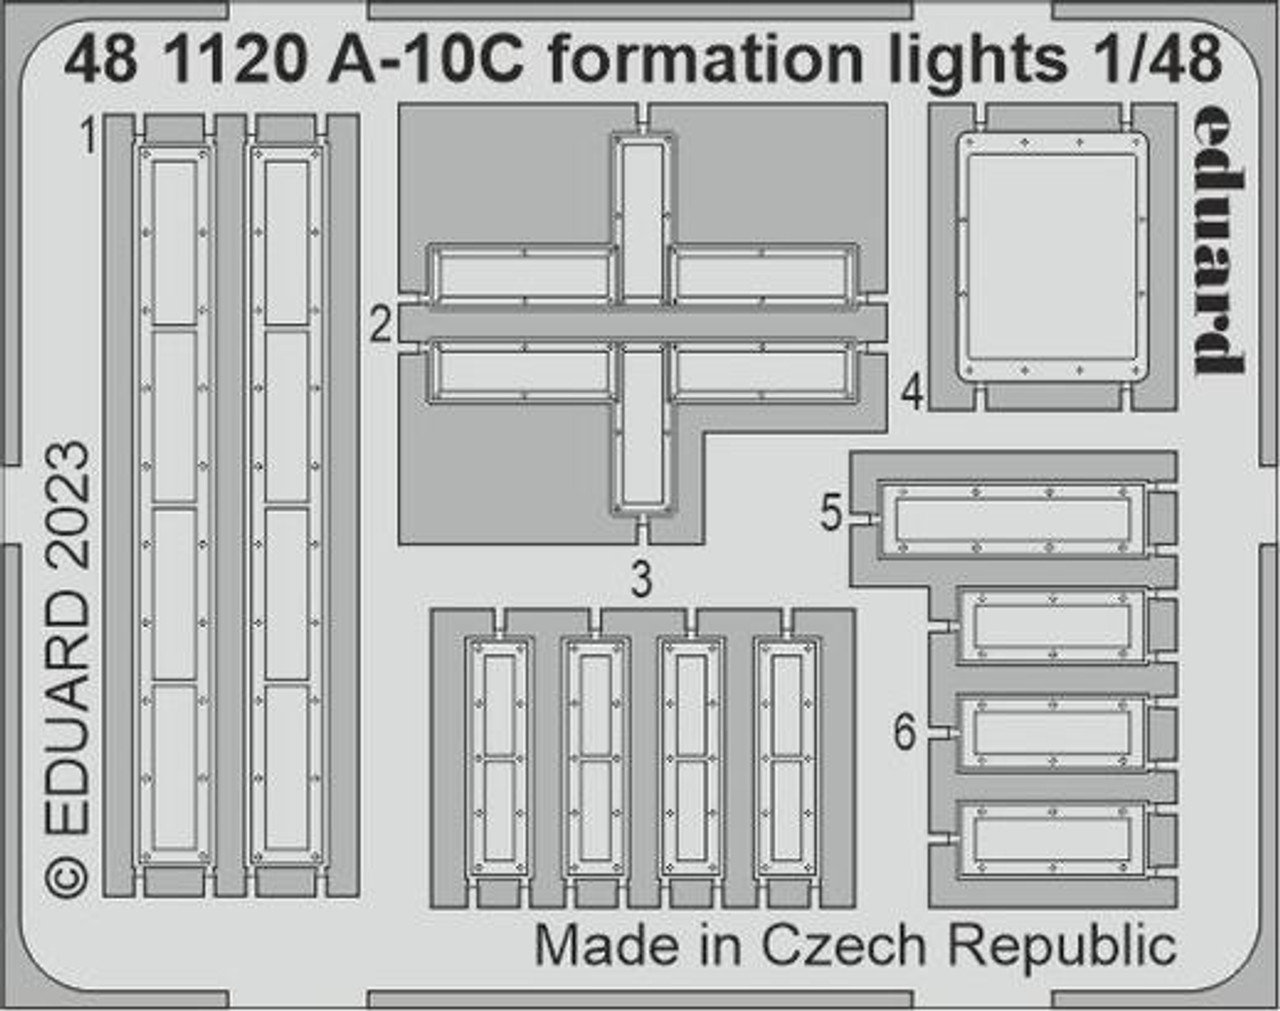 EDU481120 1/48 Eduard A-10C formation lights for Academy 481120 MMD Squadron